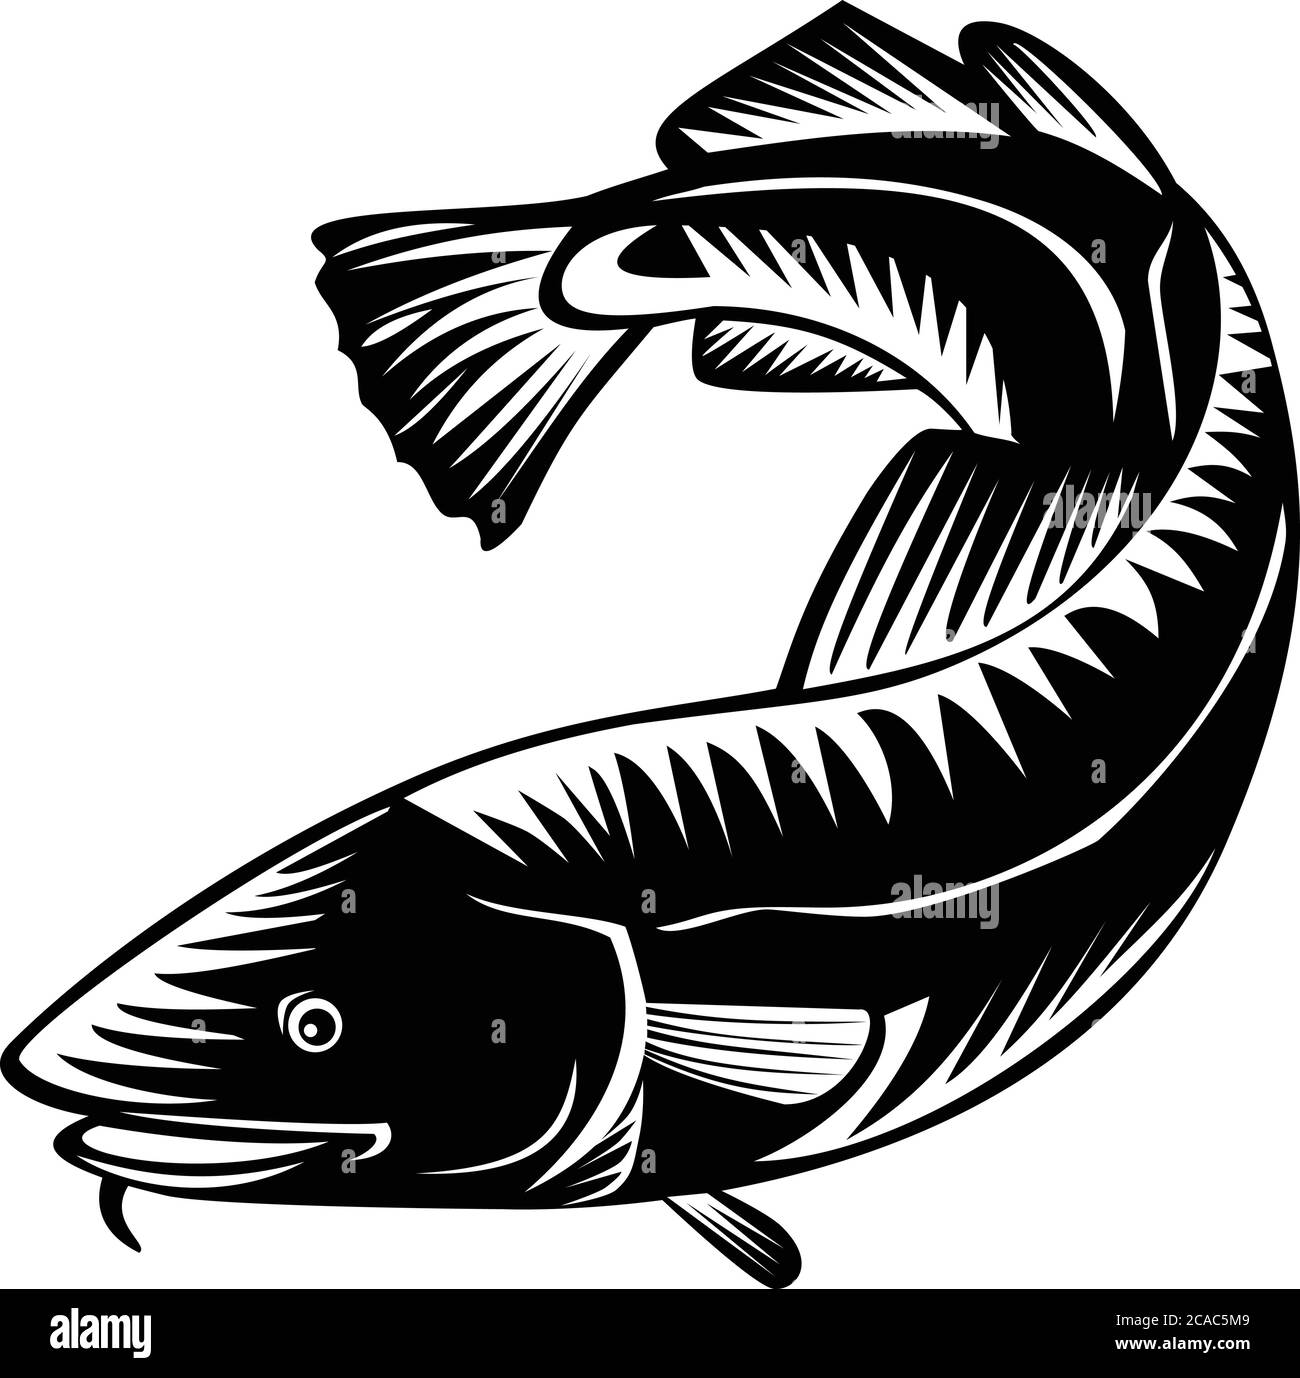 Woodcut style illustration of an Atlantic cod Gadus morhua, a benthopelagic fish of family Gadidae commercially known as cod or codling viewed from si Stock Vector